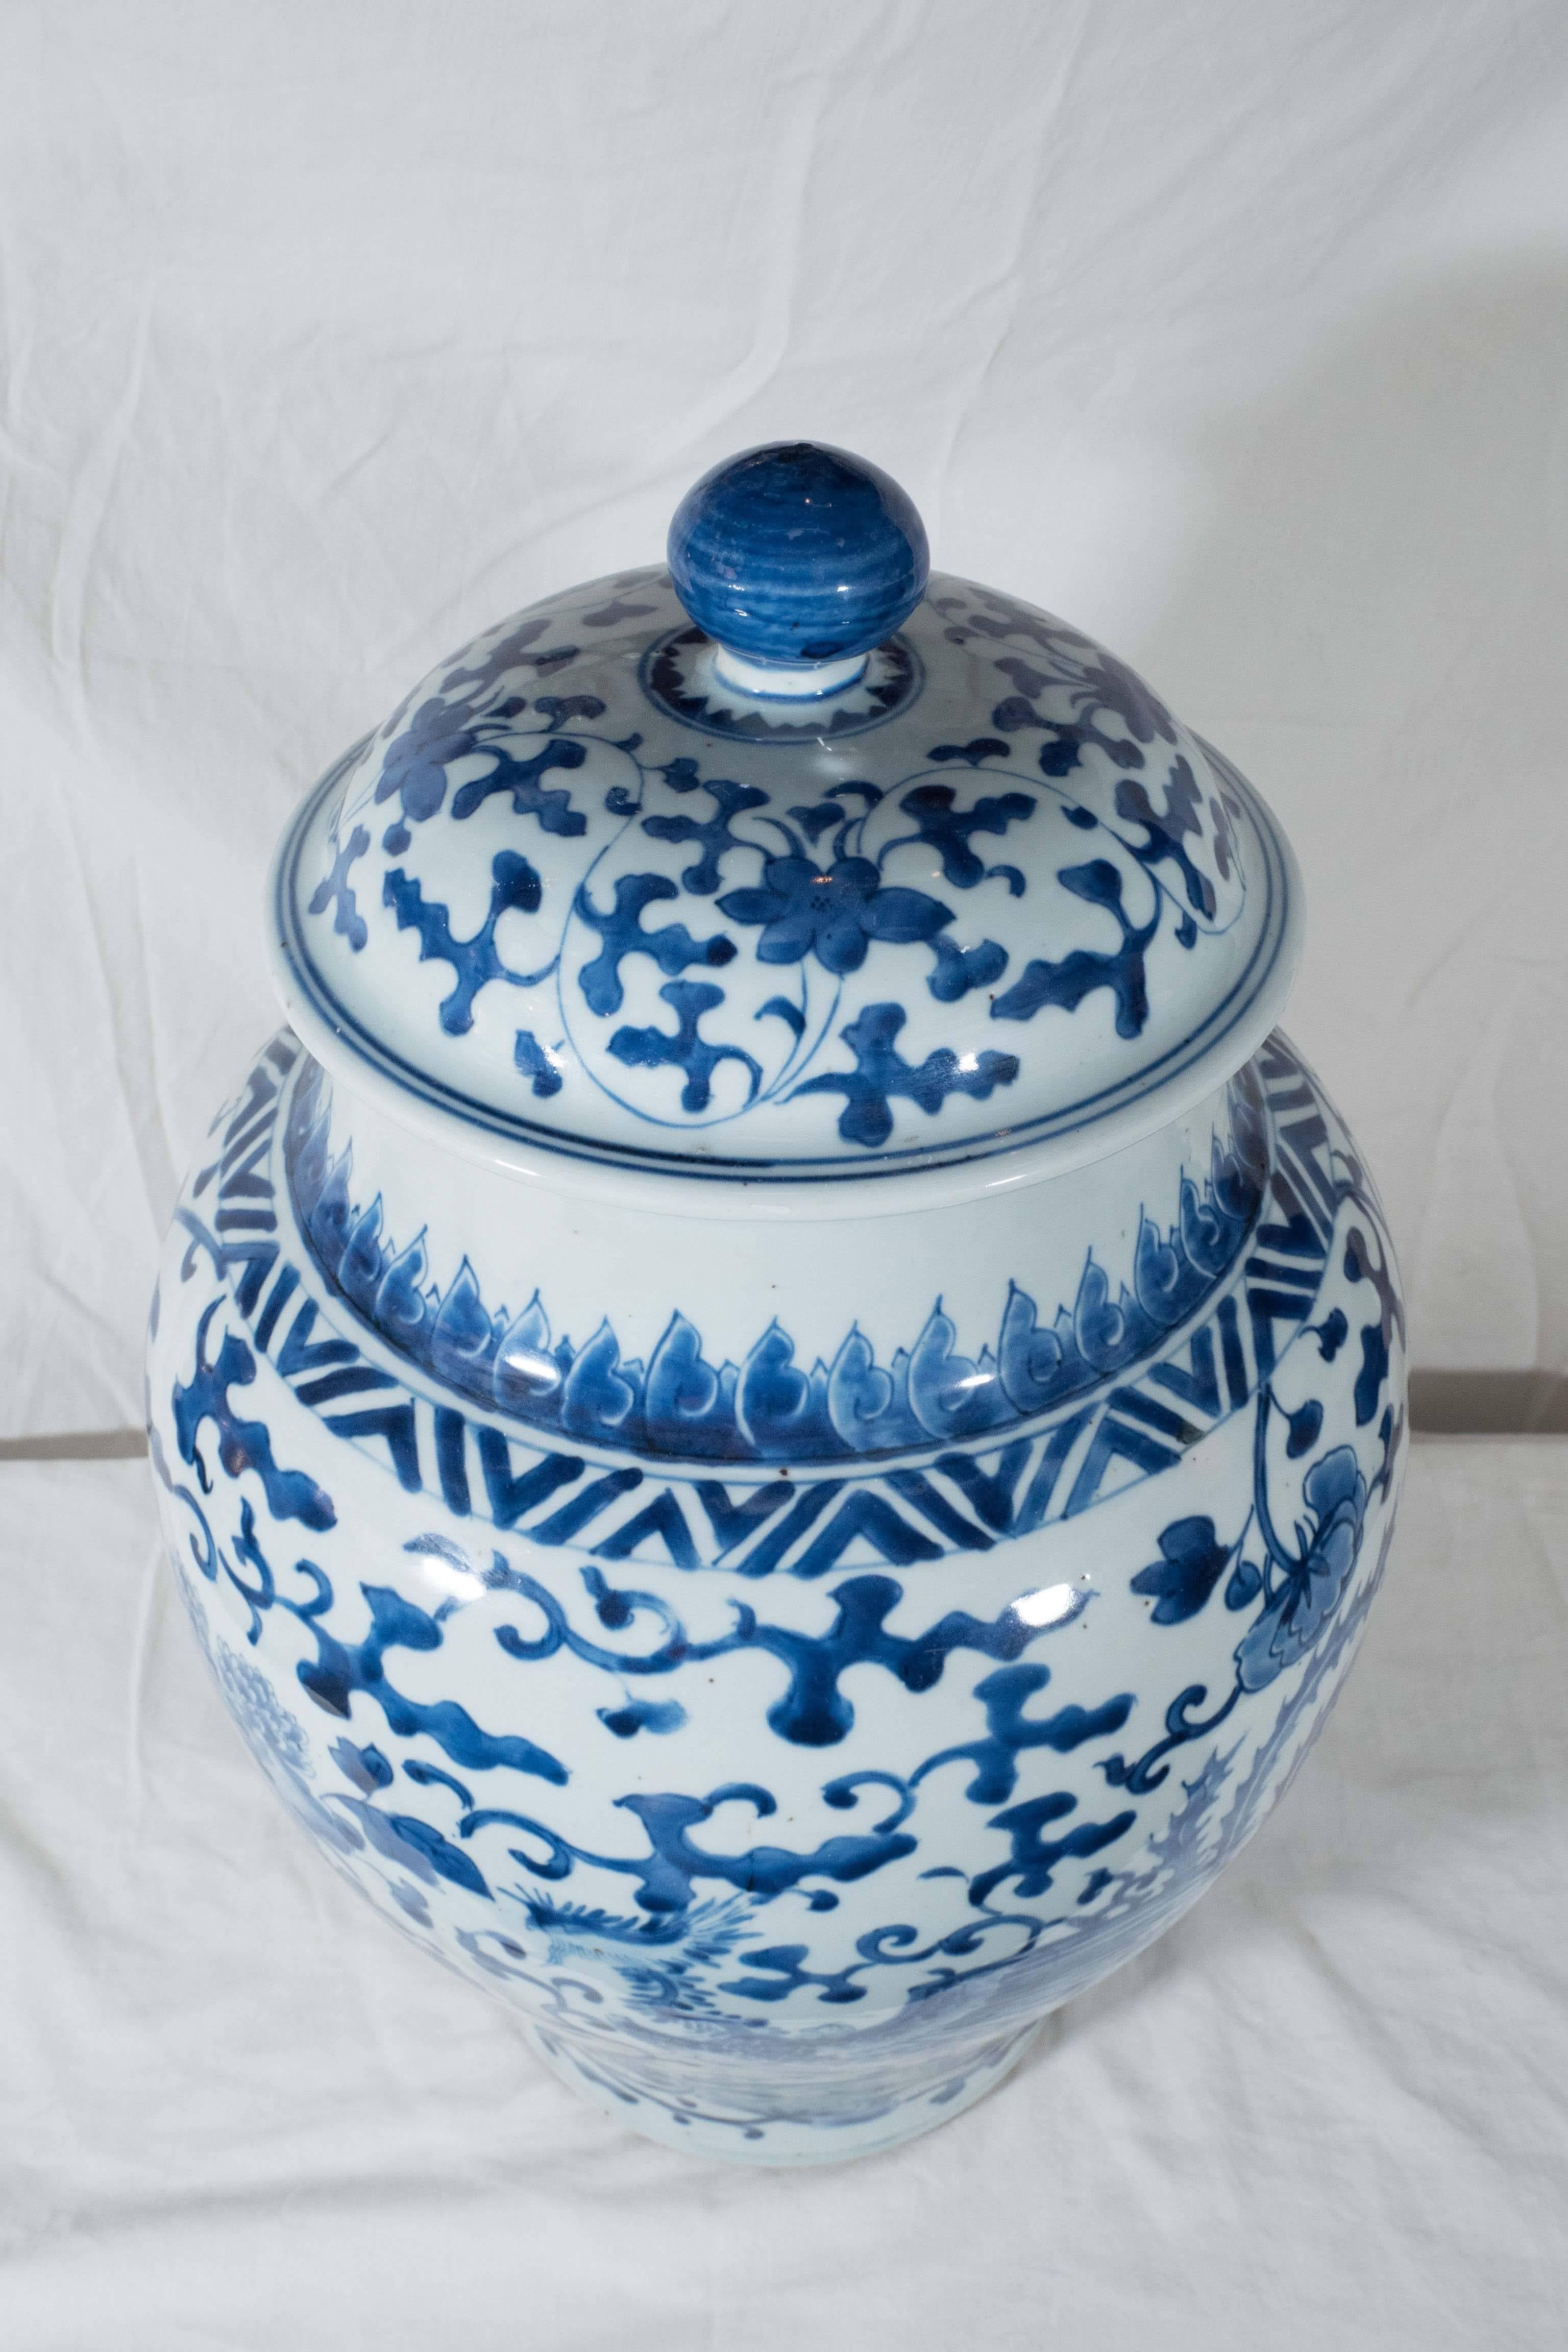 A pair of 18th century, Qianlong, Chinese porcelain covered jars painted in underglaze cobalt blue. Decorated with dense foliage with large peonies and phoenix (his head is seen on the right side in the main image). In Chinese tradition the phoenix